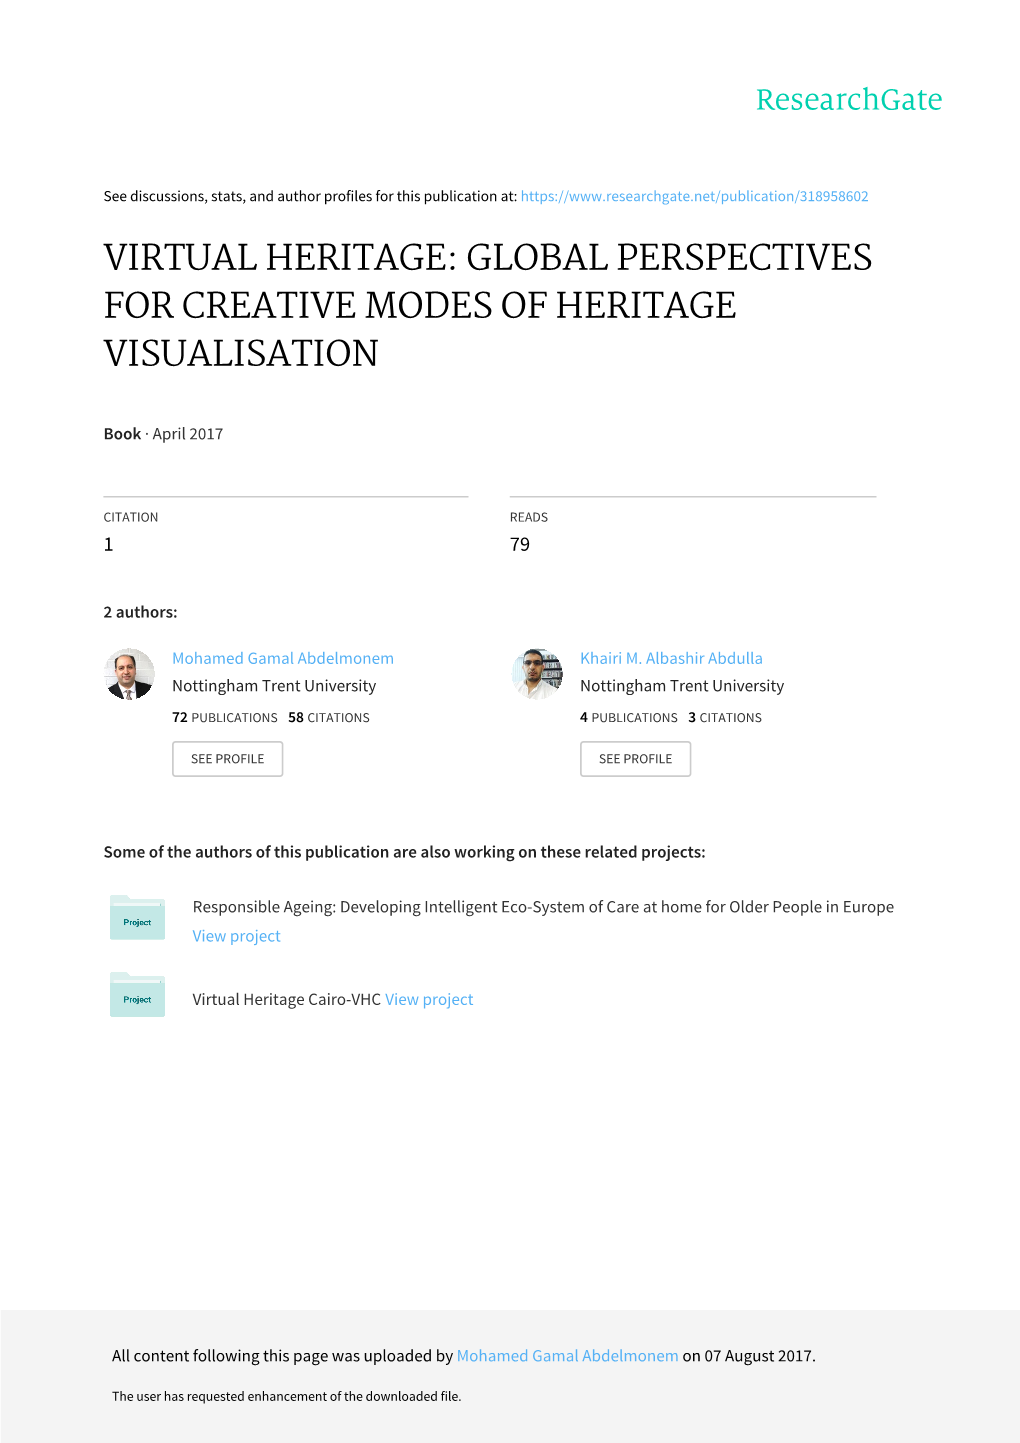 Global Perspectives for Creative Modes of Heritage Visualisation